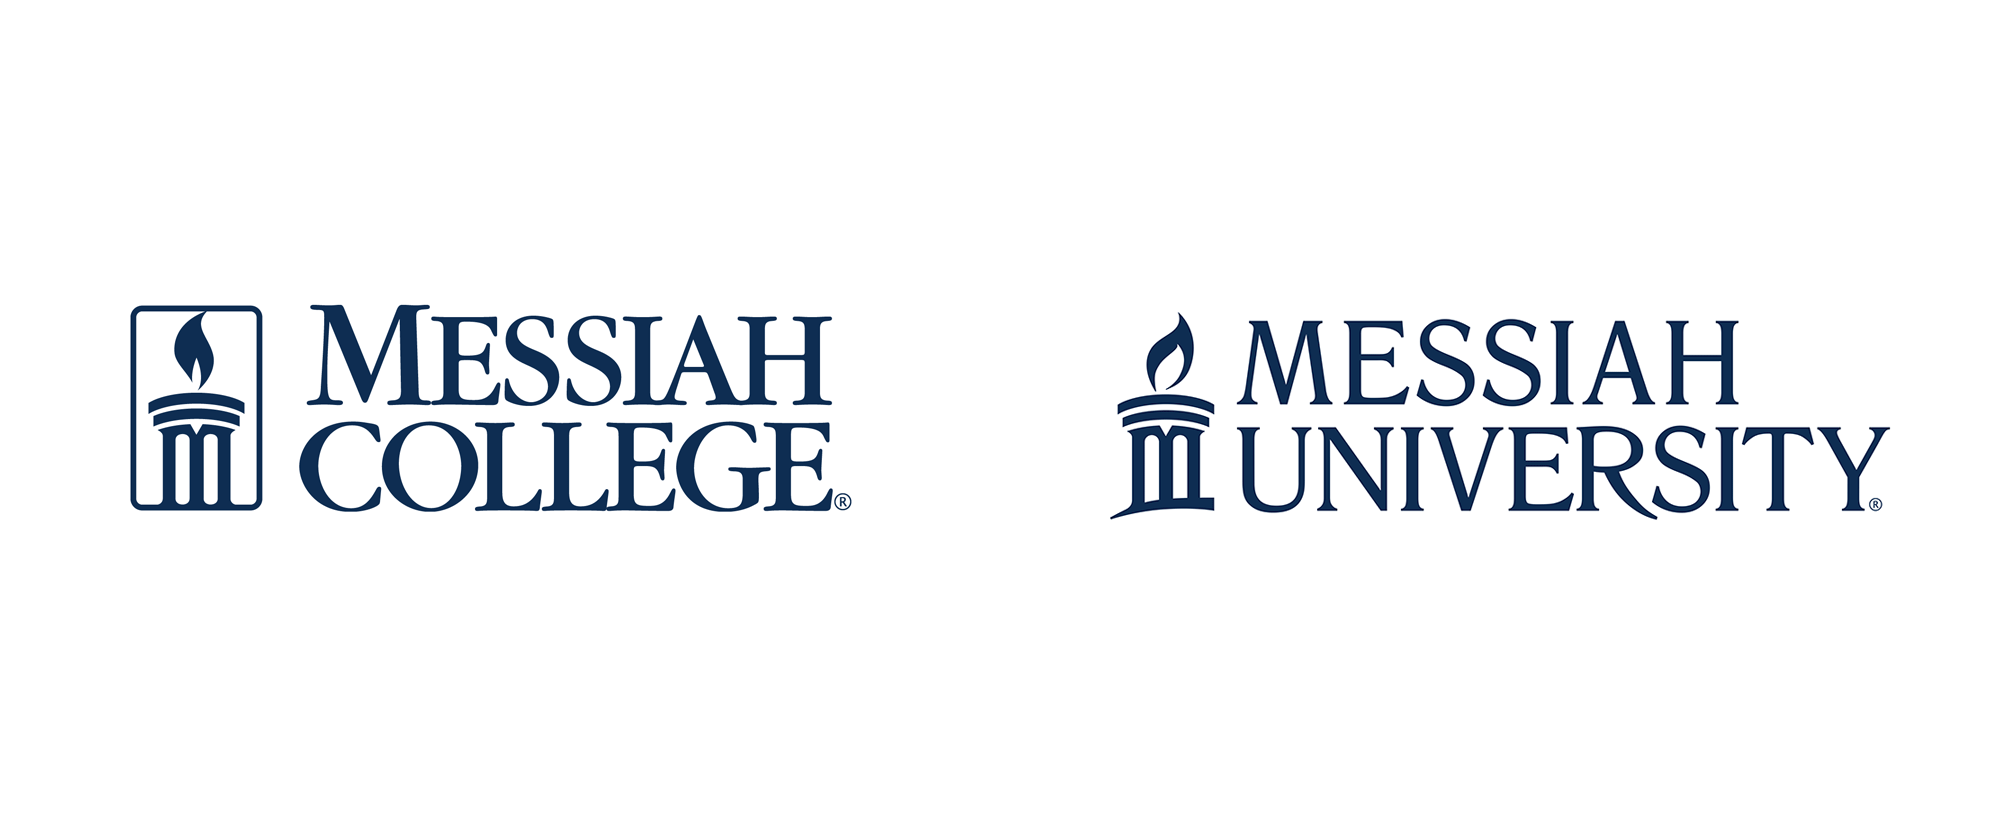 New Name and Logo for Messiah University